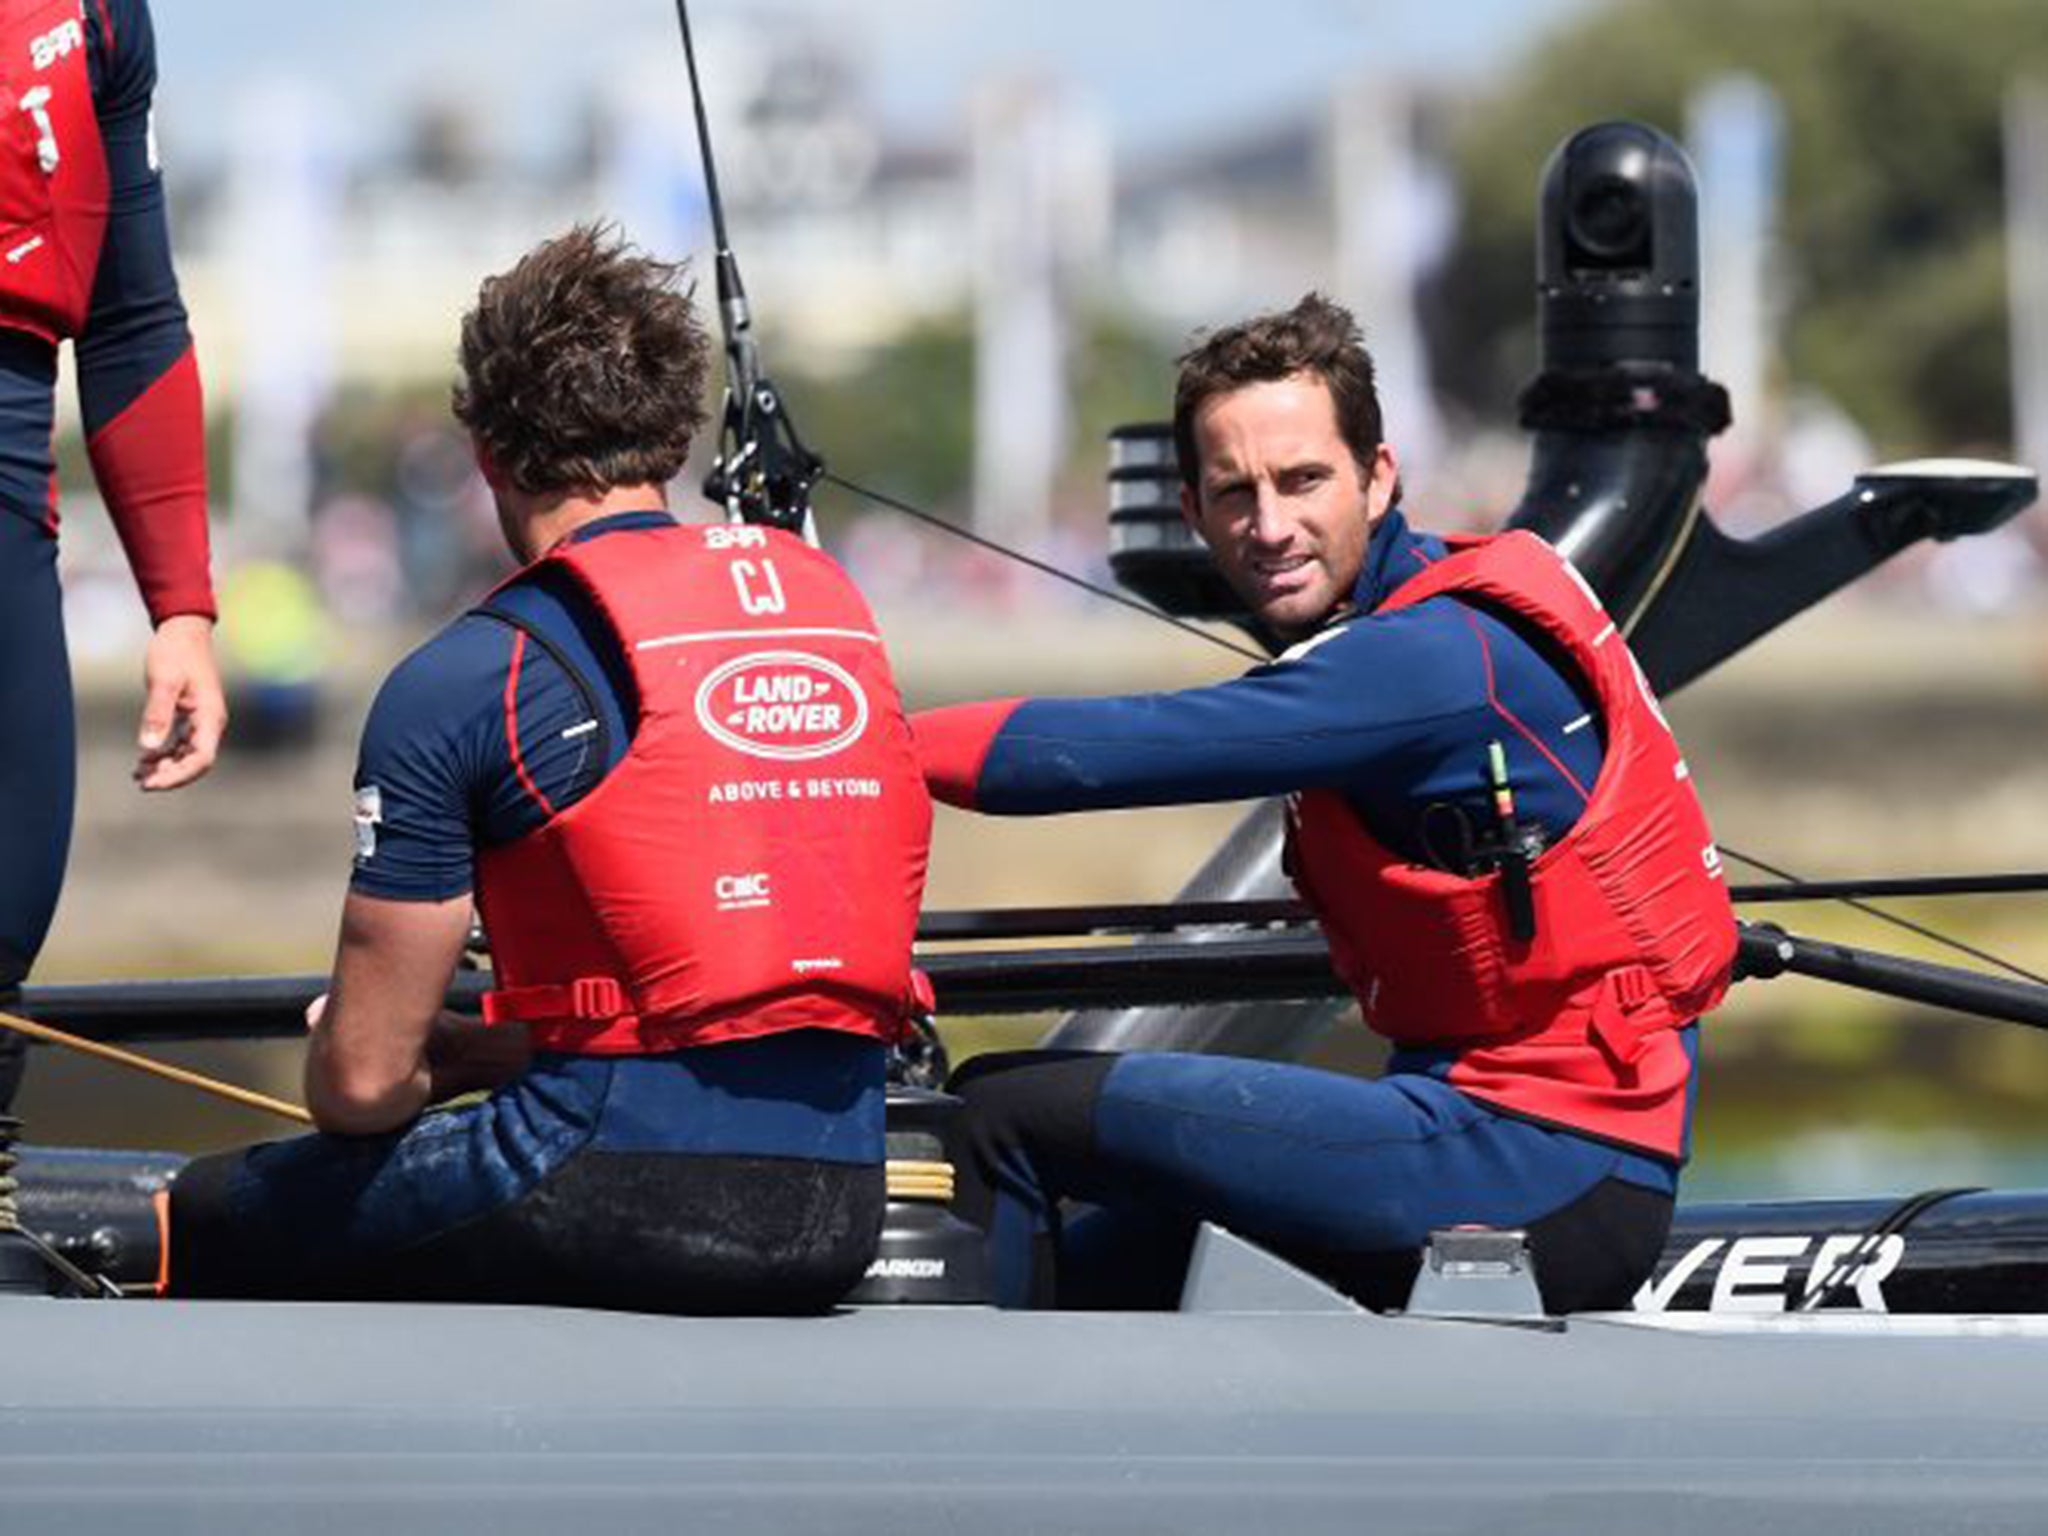 Sir Ben Ainslie skippered the Land Rover BAR catamaran in Saturday’s first race in Southsea for the America’s Cup